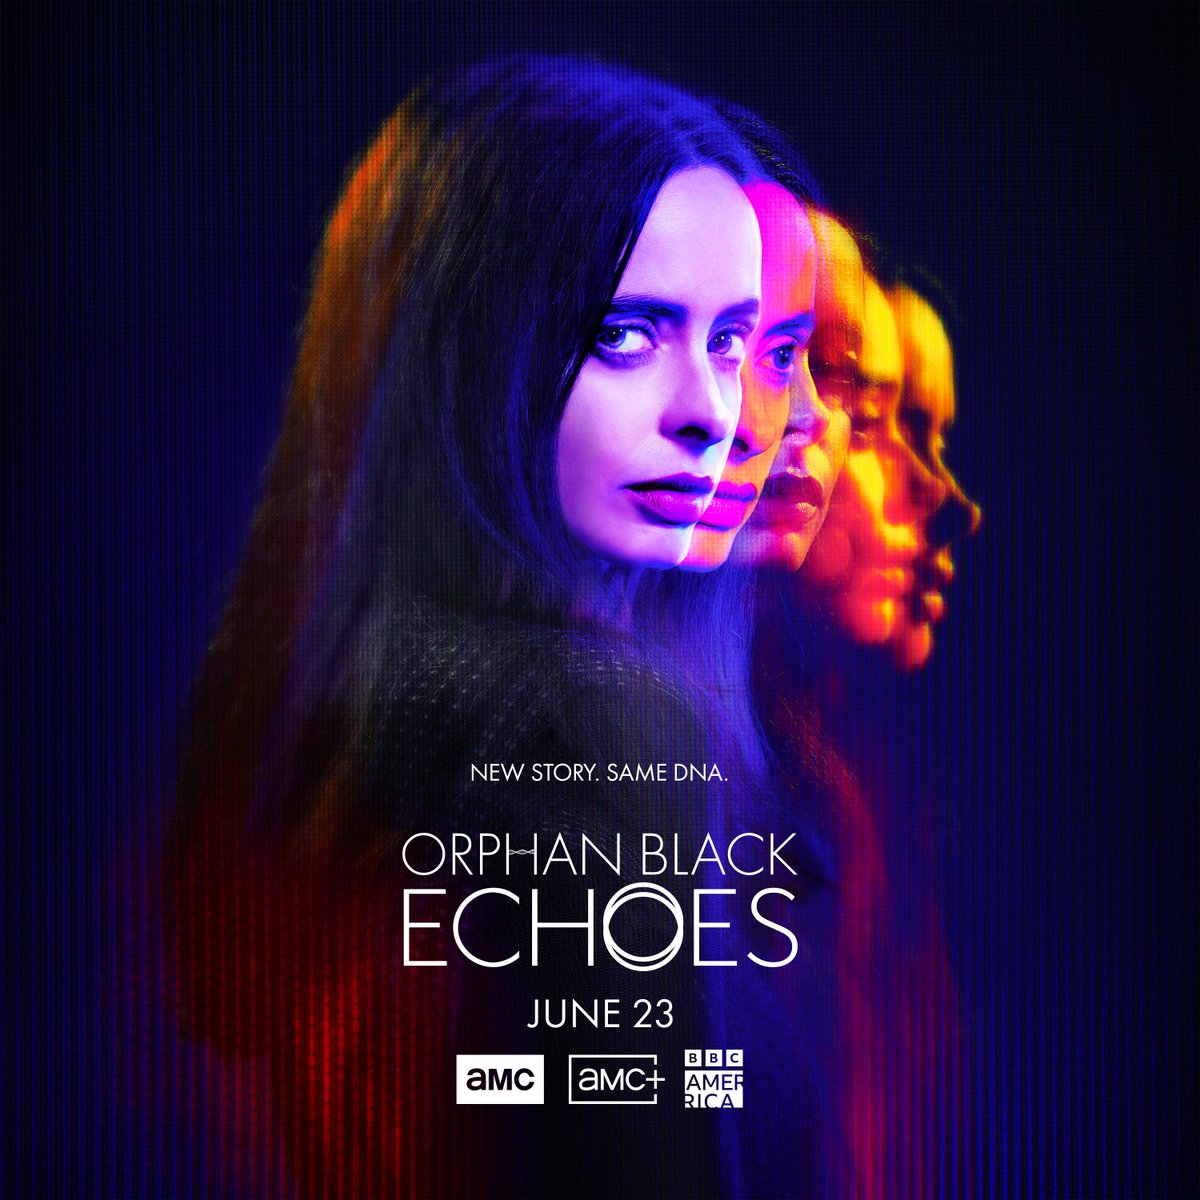 A completely unique copy of the original. #OrphanBlackEchoes premieres June 23 on AMC, BBC America, and AMC+.